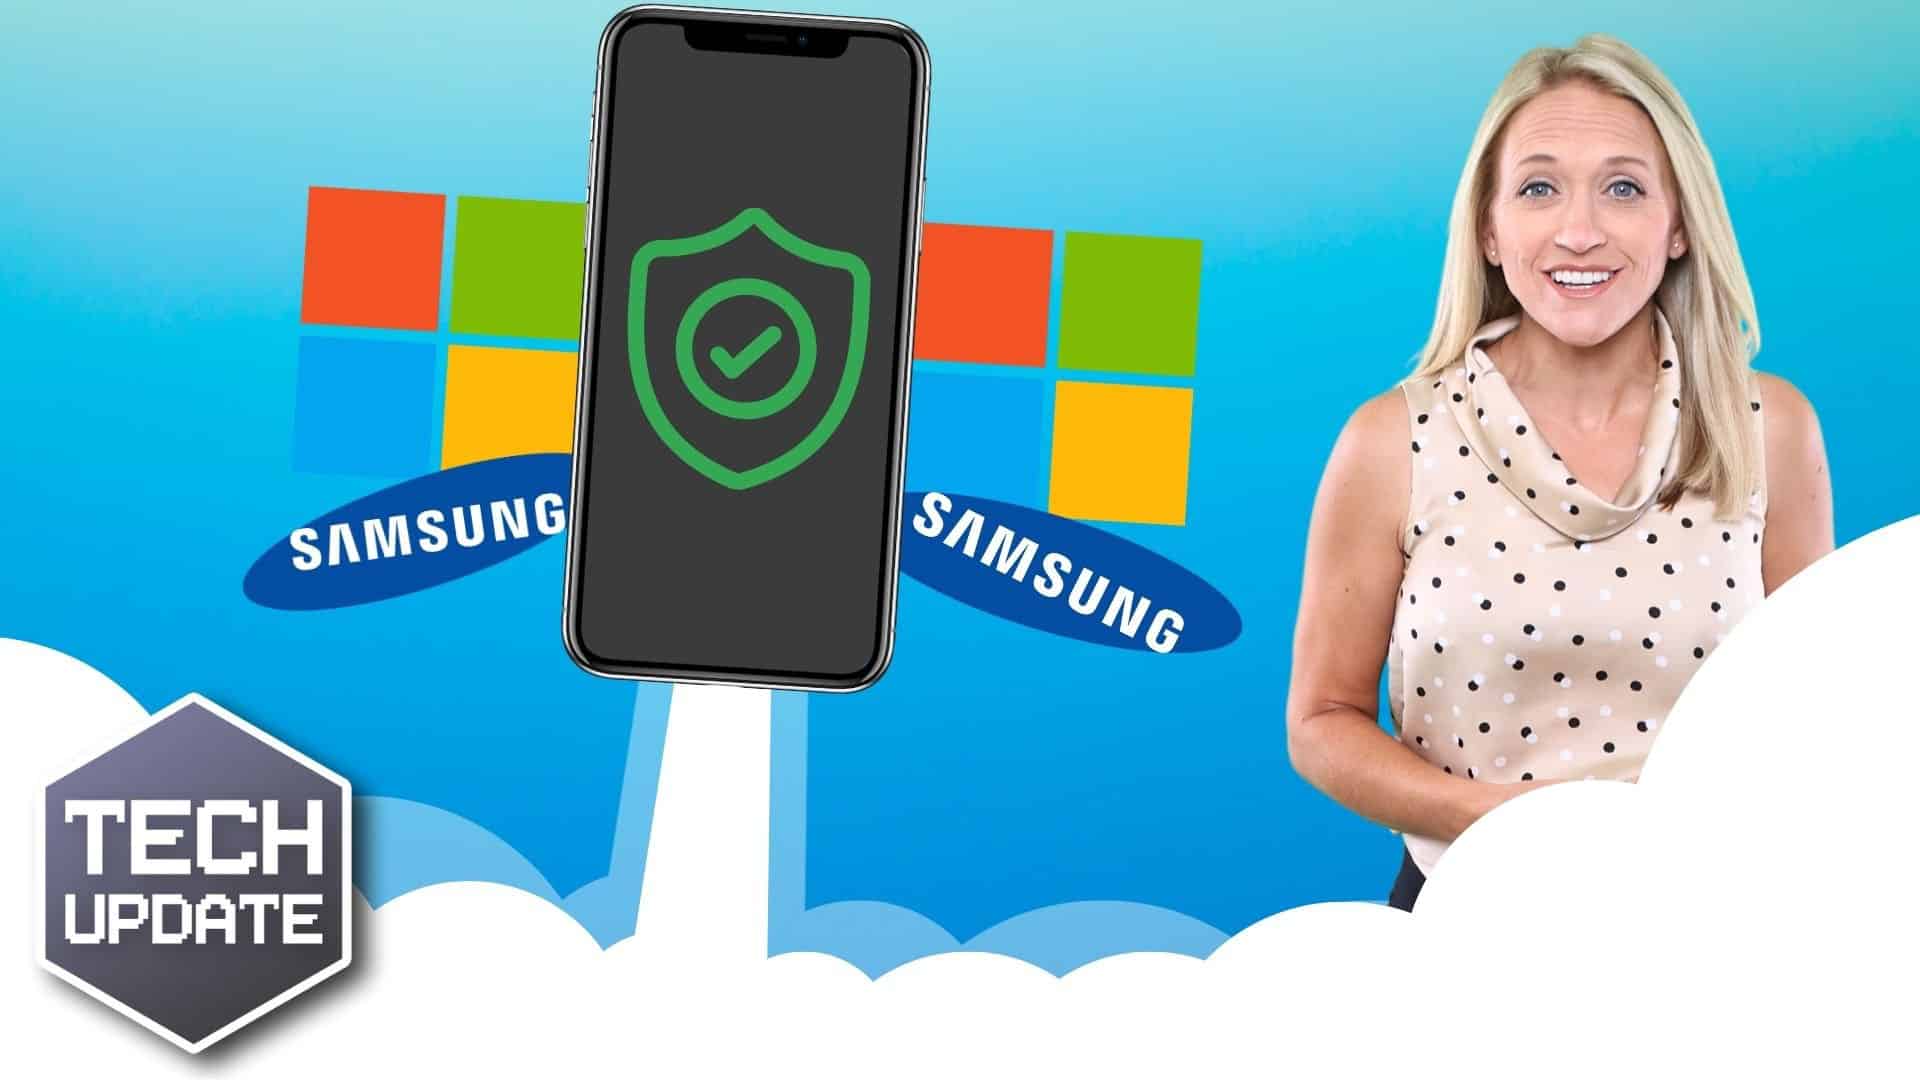 Microsoft and Samsung Are Boosting (Some) Smartphone Security cover